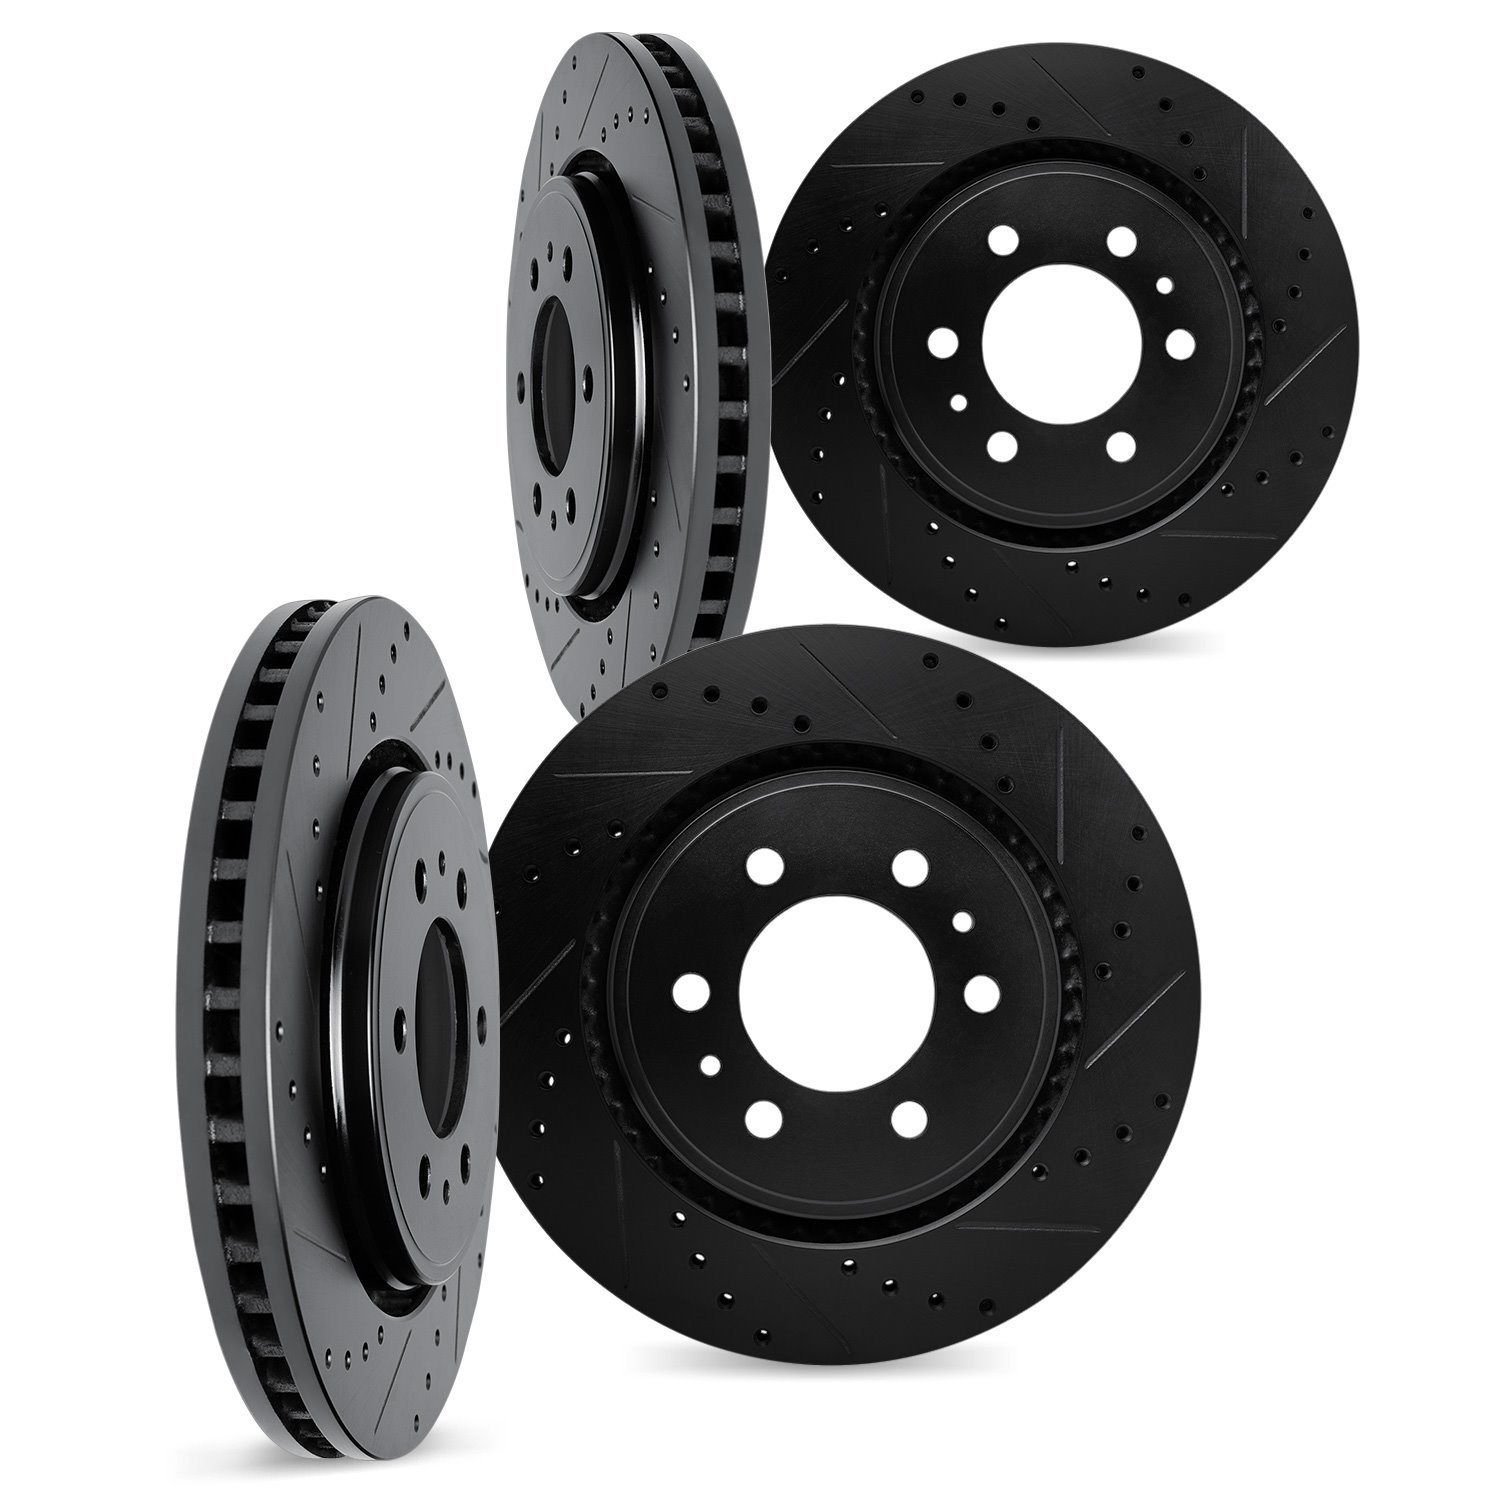 8004-54339 Drilled/Slotted Brake Rotors [Black], Fits Select Ford/Lincoln/Mercury/Mazda, Position: Front and Rear